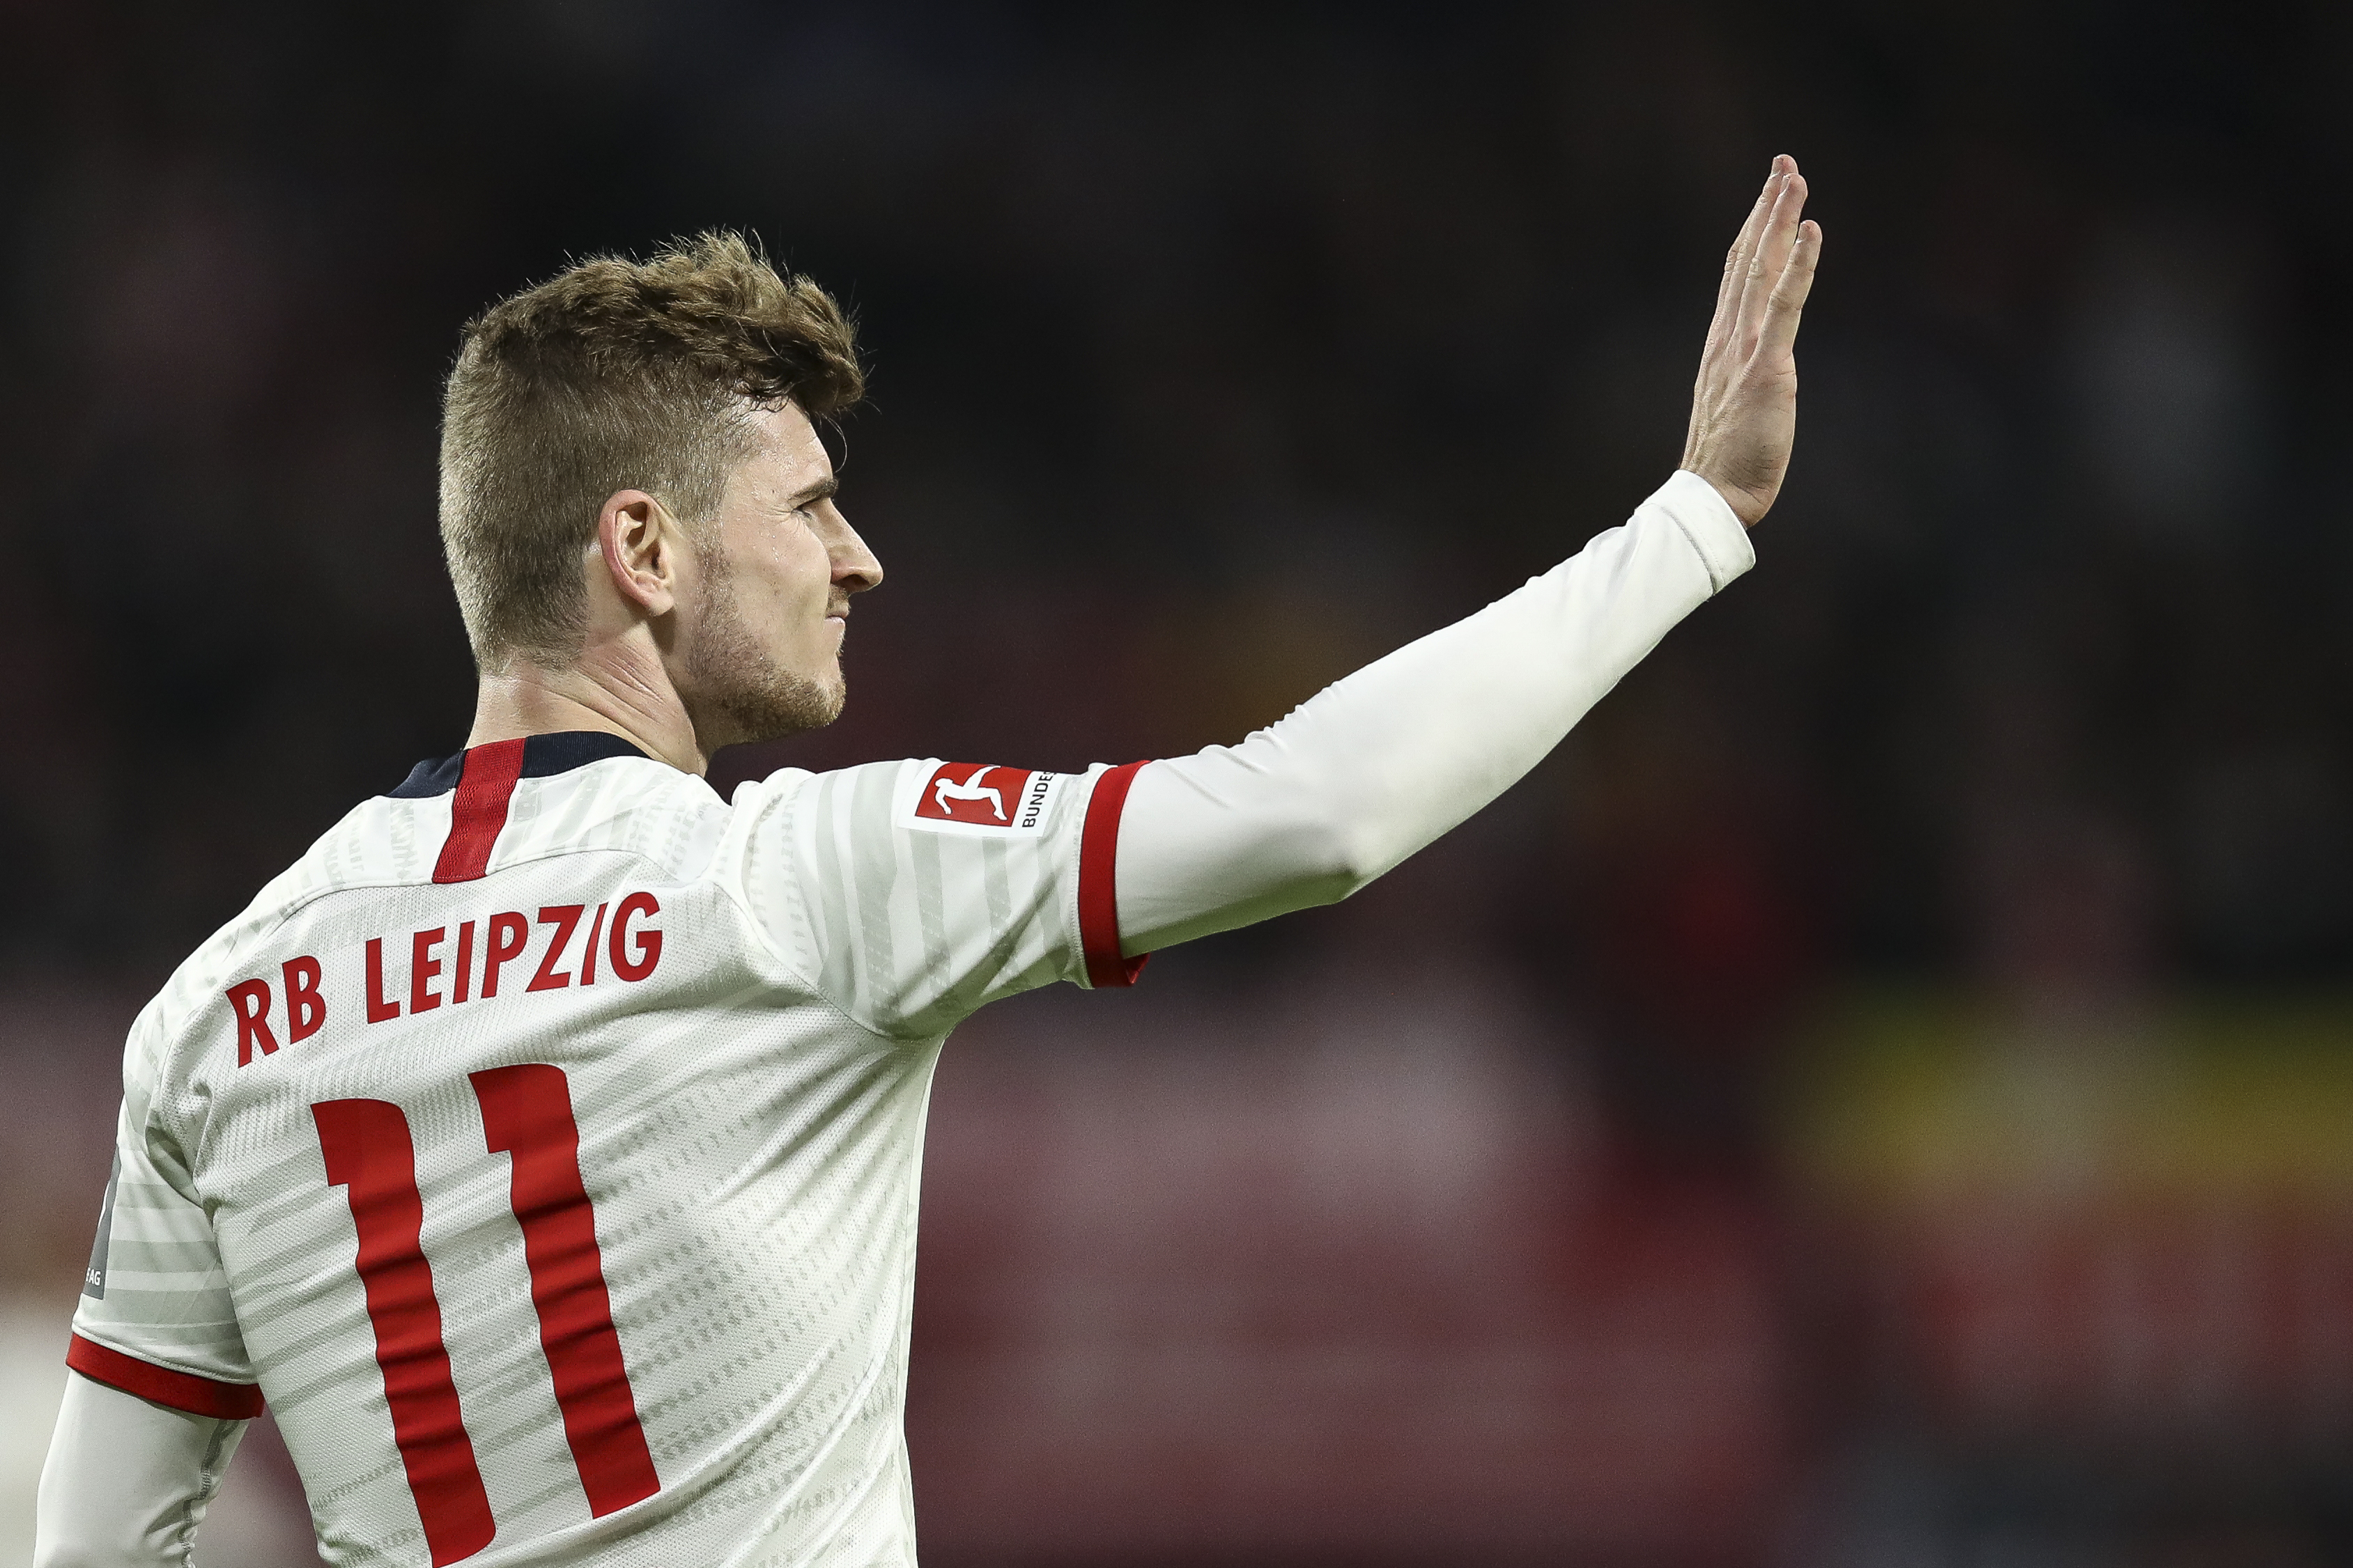 Timo Werner might not be available to take on FC Heidenheim. (Photo by Maja Hitij/Bongarts/Getty Images)